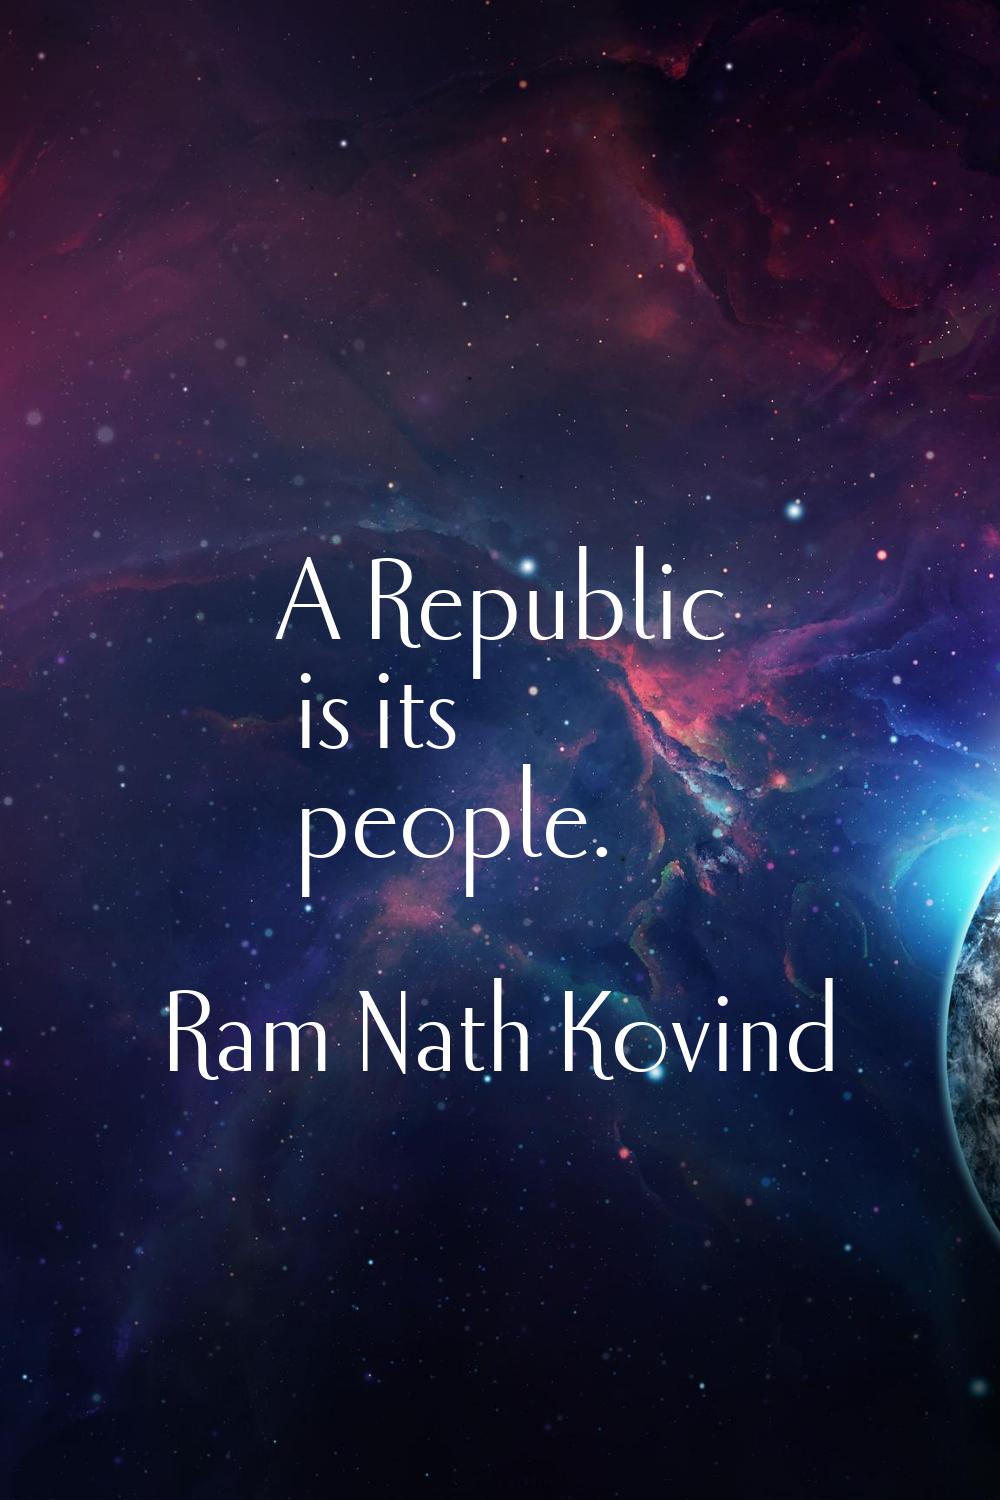 A Republic is its people.